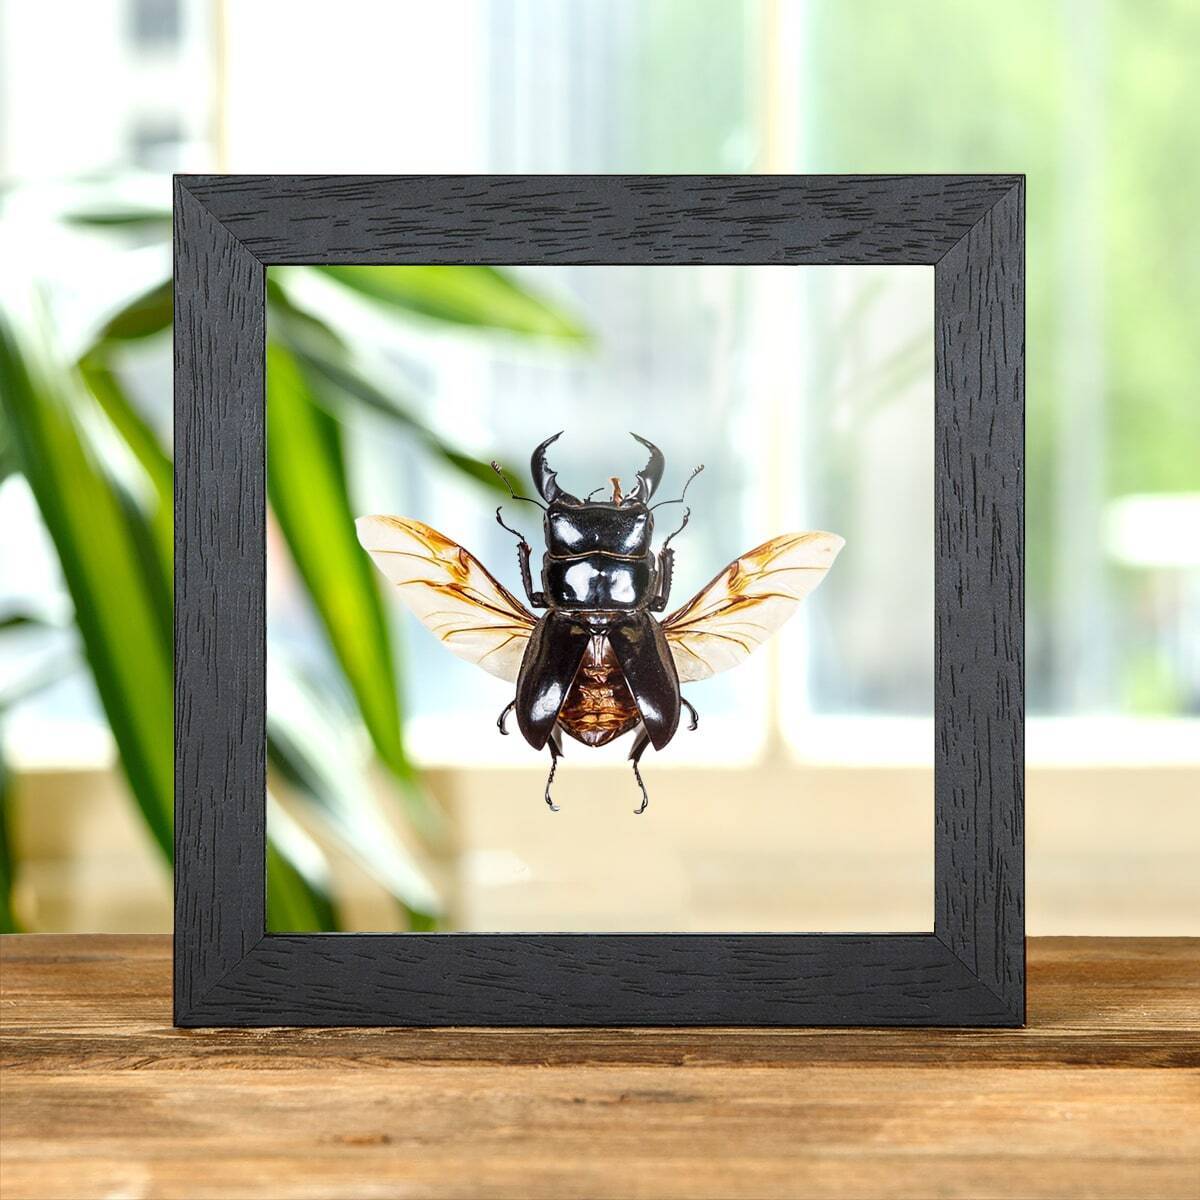 Wing-spread Giant Stag Taxidermy Beetle Frame (Dorcus titanus)